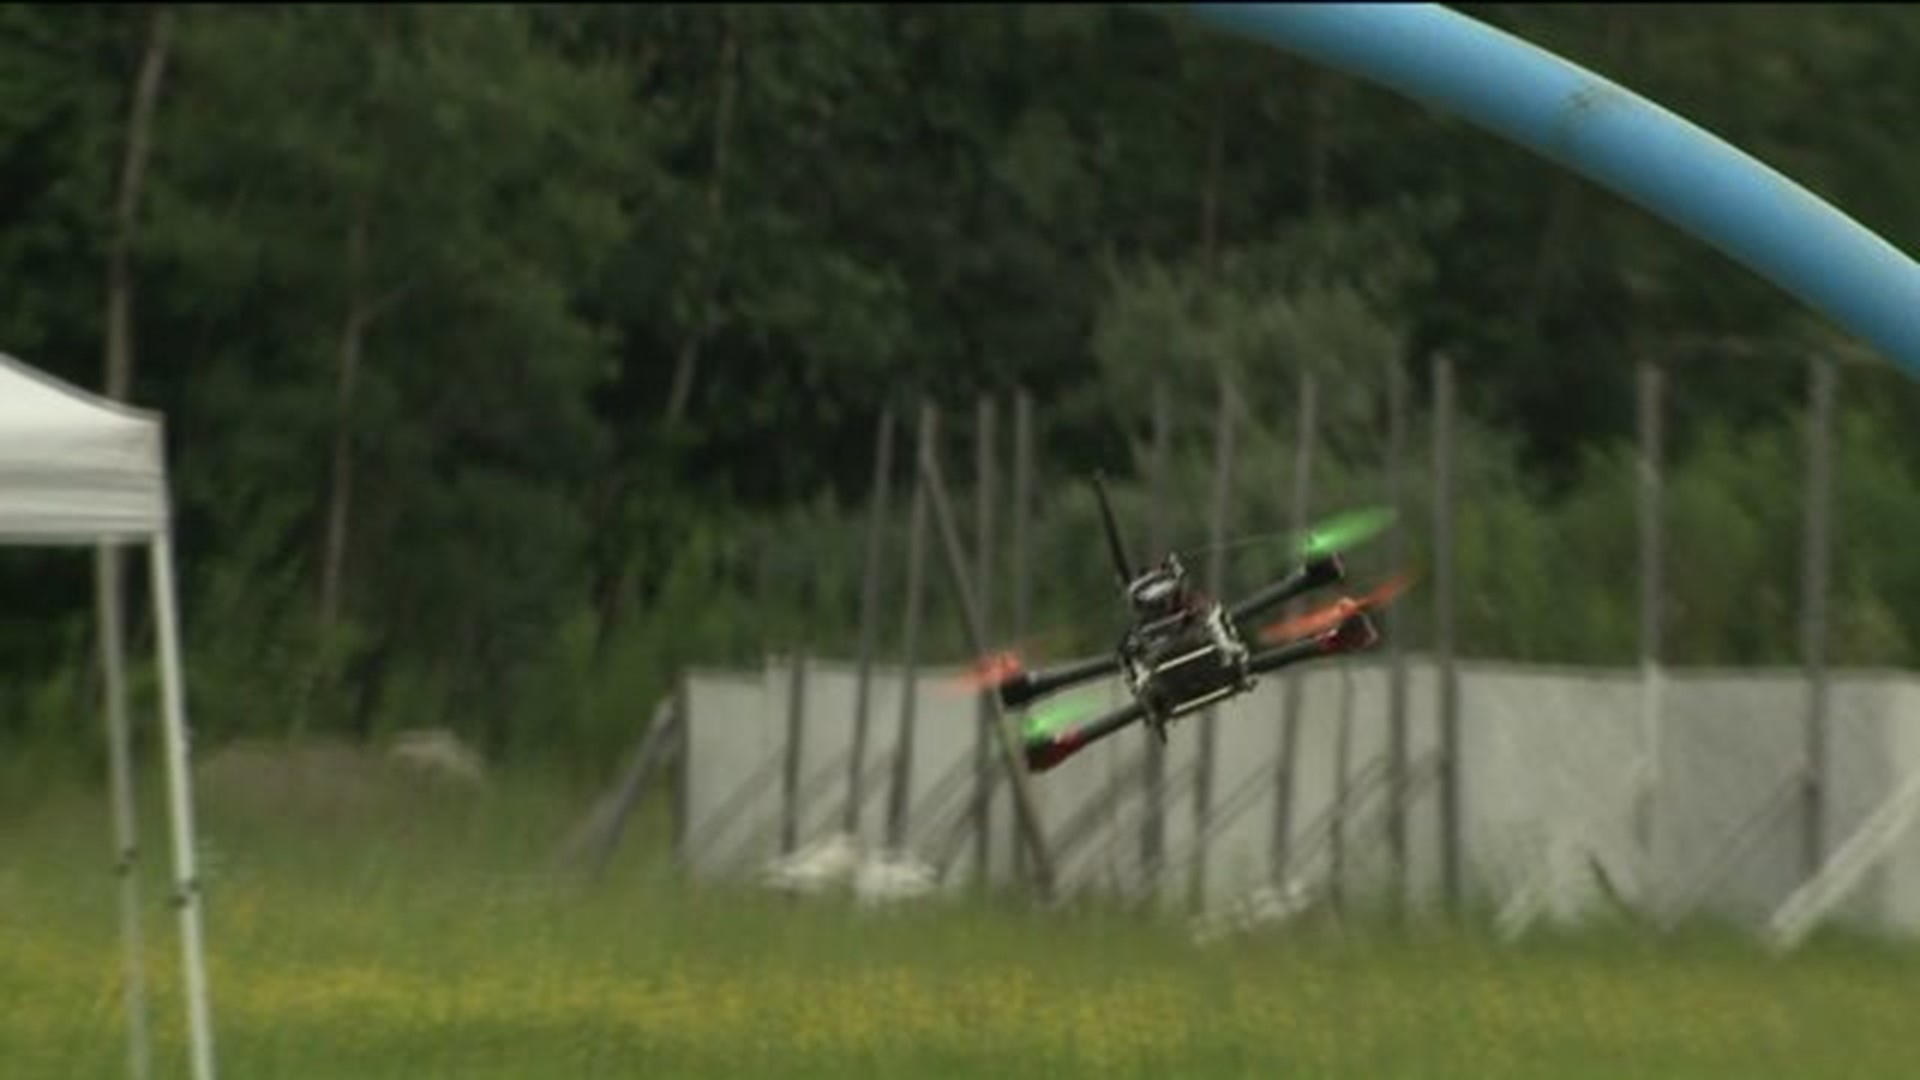 A new form of racing takes flight in Winsted